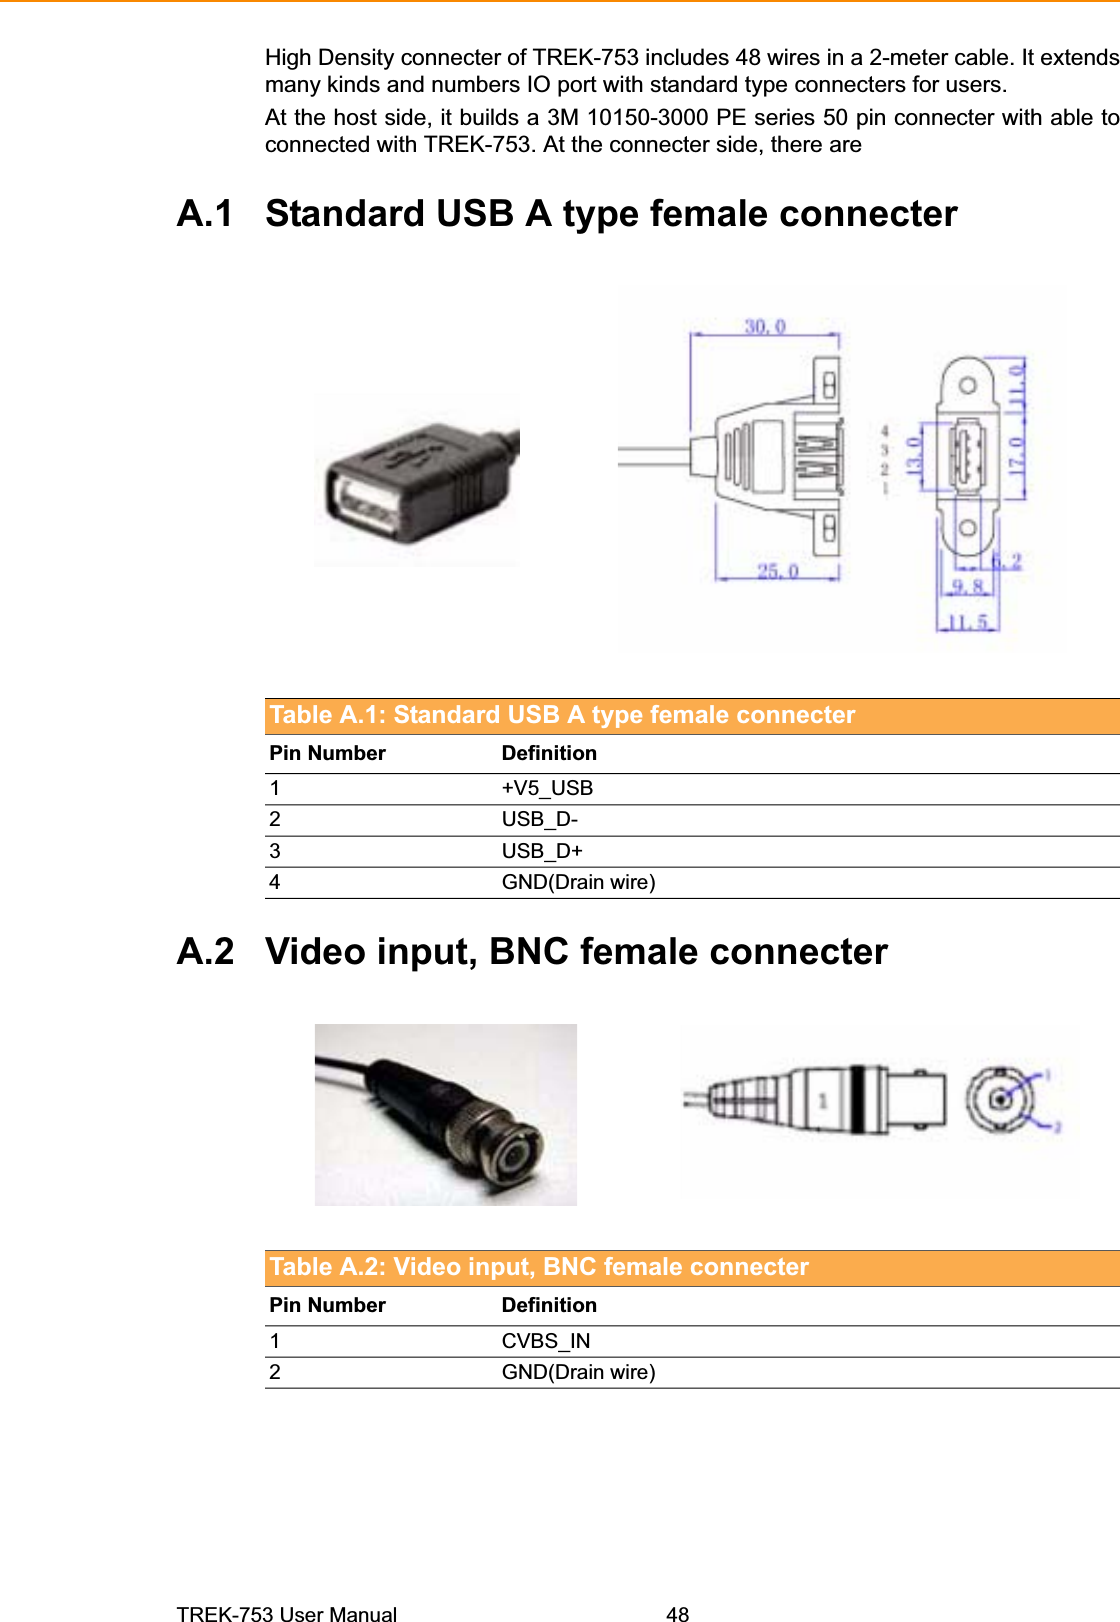 High Density connecter of TREK-753 includes 48 wires in a 2-meter cable. It extends many kinds and numbers IO port with standard type connecters for users. At the host side, it builds a 3M 10150-3000 PE series 50 pin connecter with able to connected with TREK-753. At the connecter side, there are A.1 Standard USB A type female connecter Table A.1: Standard USB A type female connecter Pin Number  Definition 1 +V5_USB 2 USB_D-3 USB_D+ 4 GND(Drain wire) A.2 Video input, BNC female connecter Table A.2: Video input, BNC female connecter Pin Number  Definition 1 CVBS_IN 2 GND(Drain wire) TREK-753 User Manual  48 